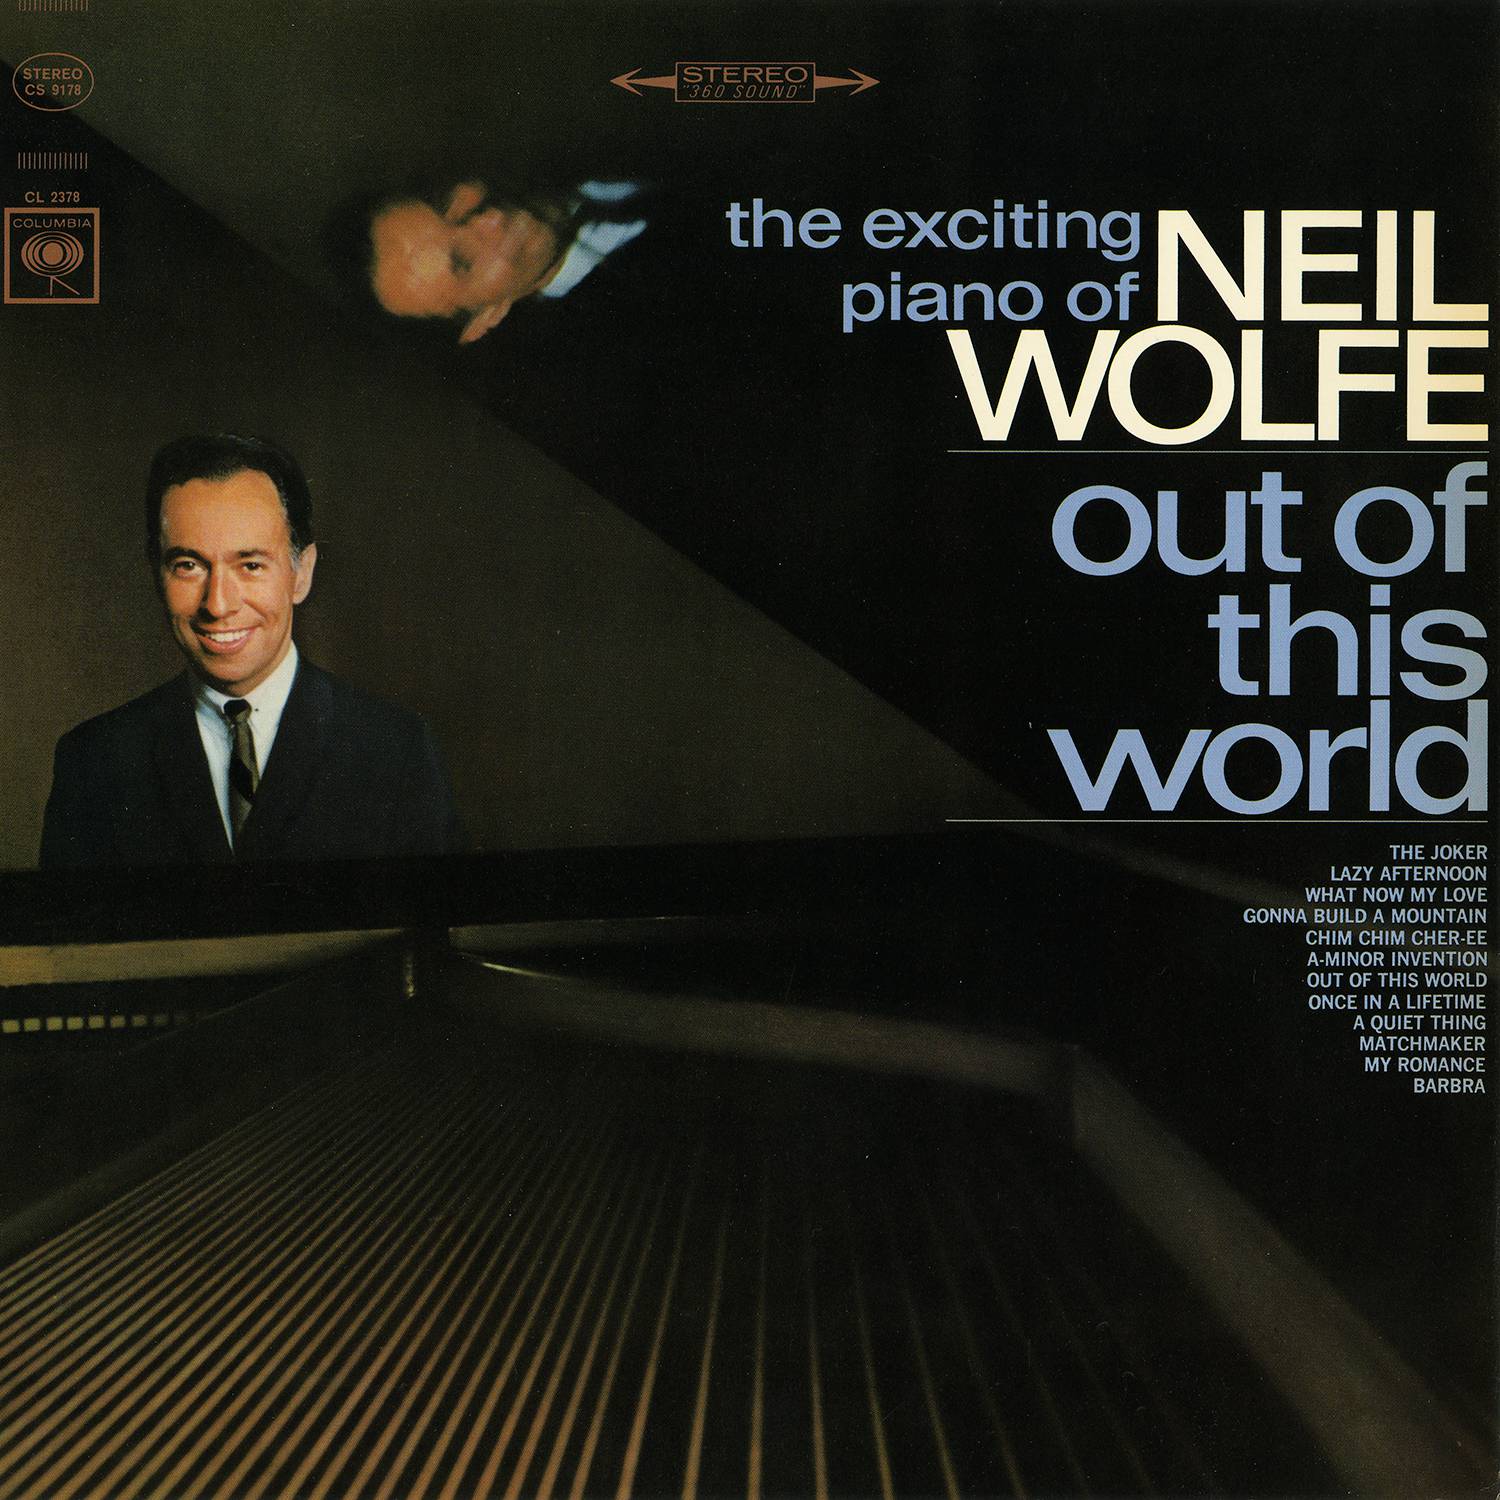 Neil Wolfe - Out Of This World: The Exciting Piano Of Neil Wolfe (1965/2015) [AcousticSounds FLAC 24bit/96kHz]